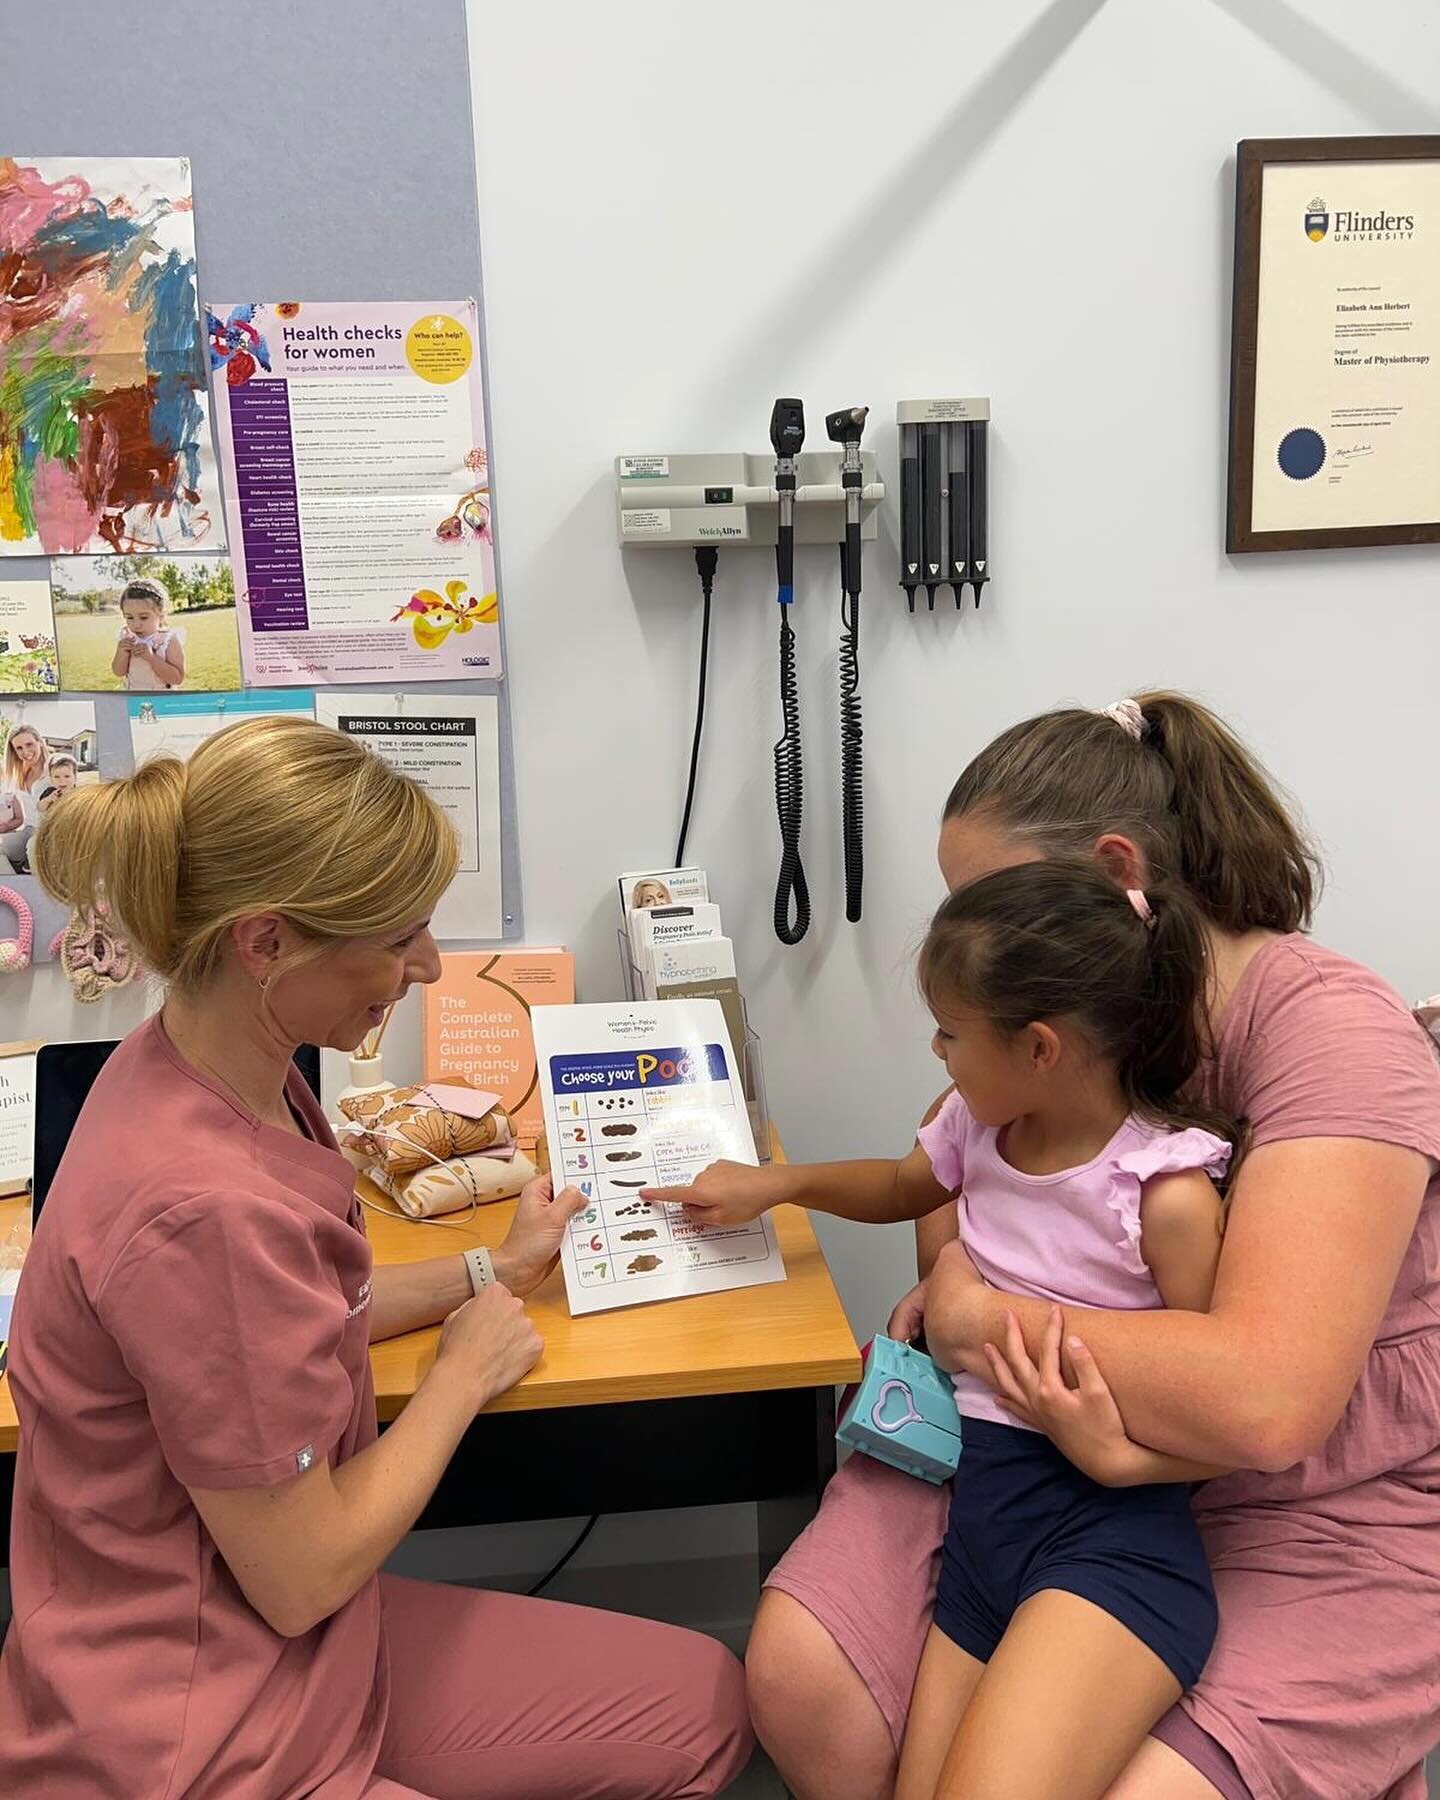 Do you know we also treat children in our clinic? 👧👶

Common conditions we see in children between the ages of 4-10years of age include:

➡️ urinary urgency 
➡️ increased urinary frequency 
➡️ daytime incontinence (Enuresis)
➡️ giggle incontinence 